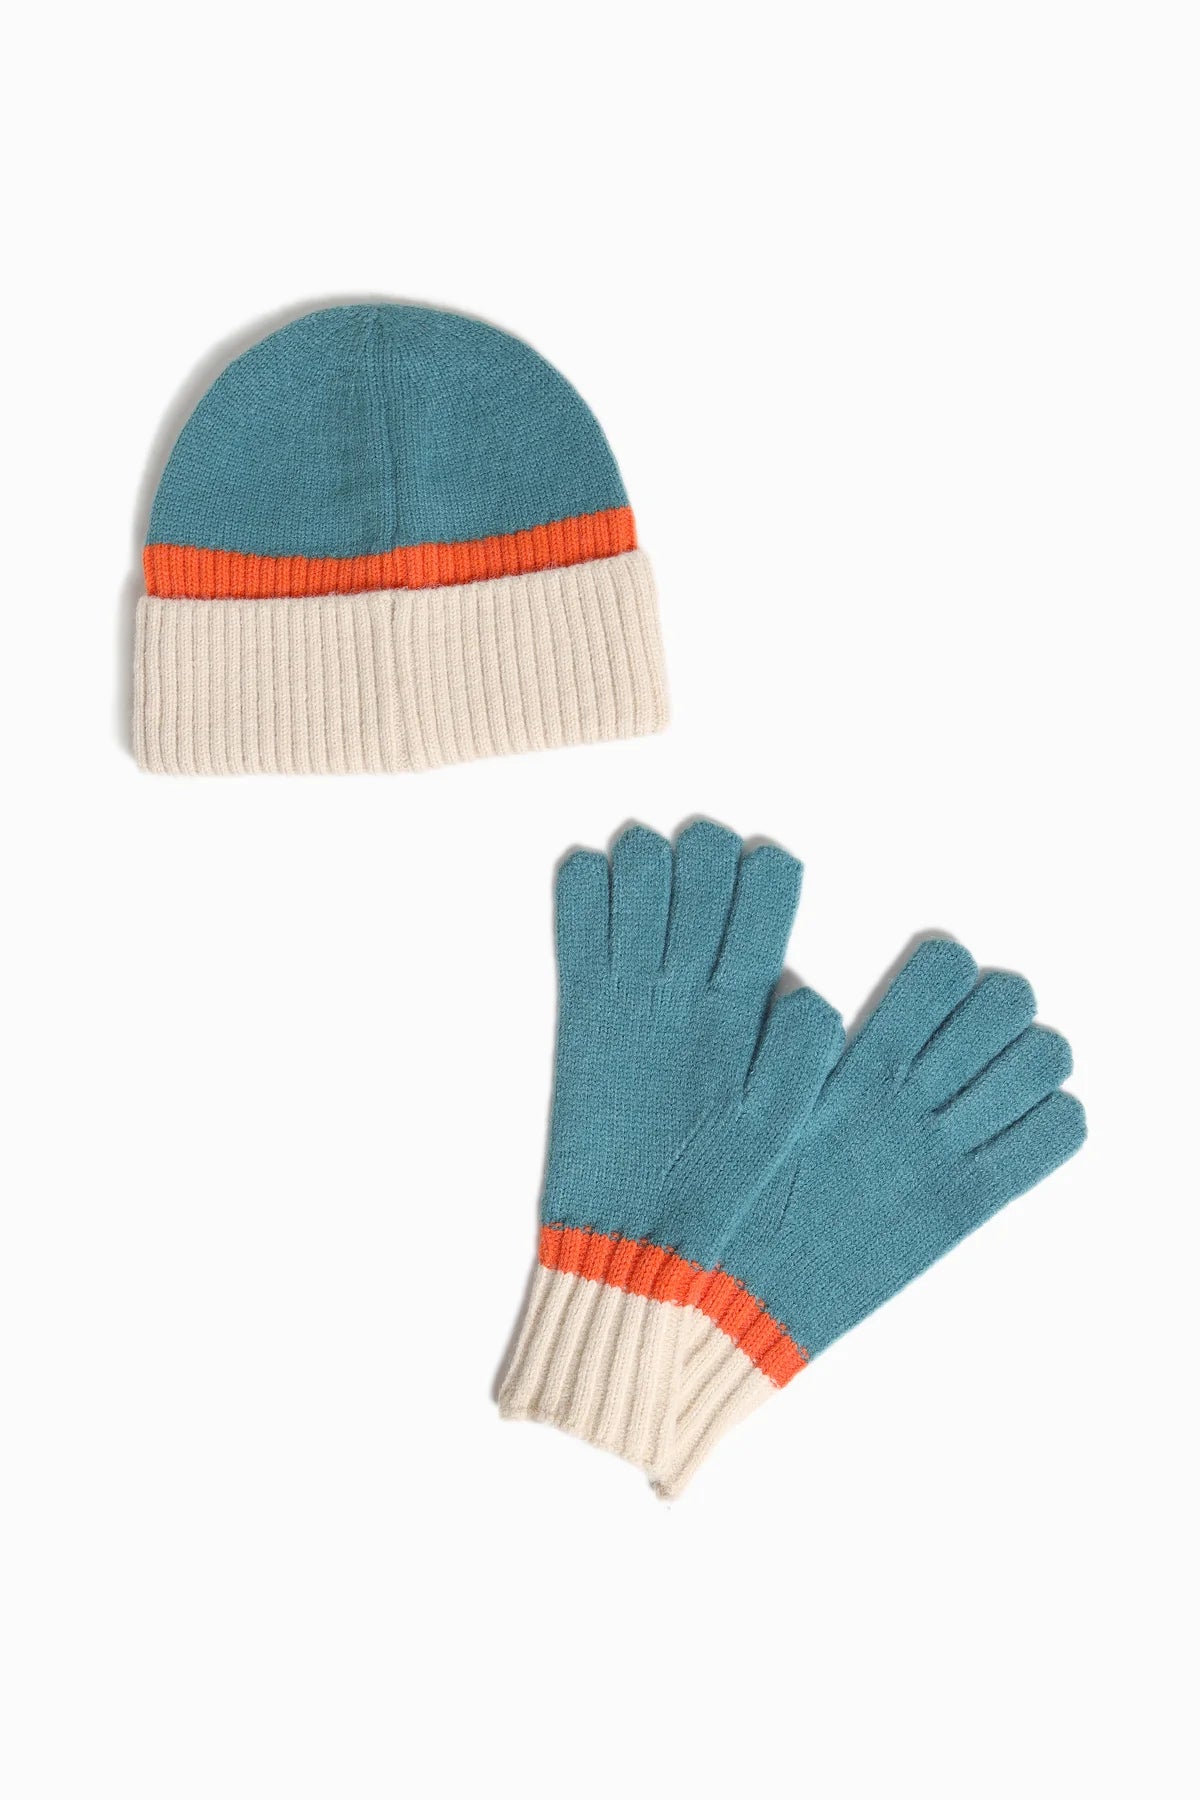 Tri Color Beanie in Teal